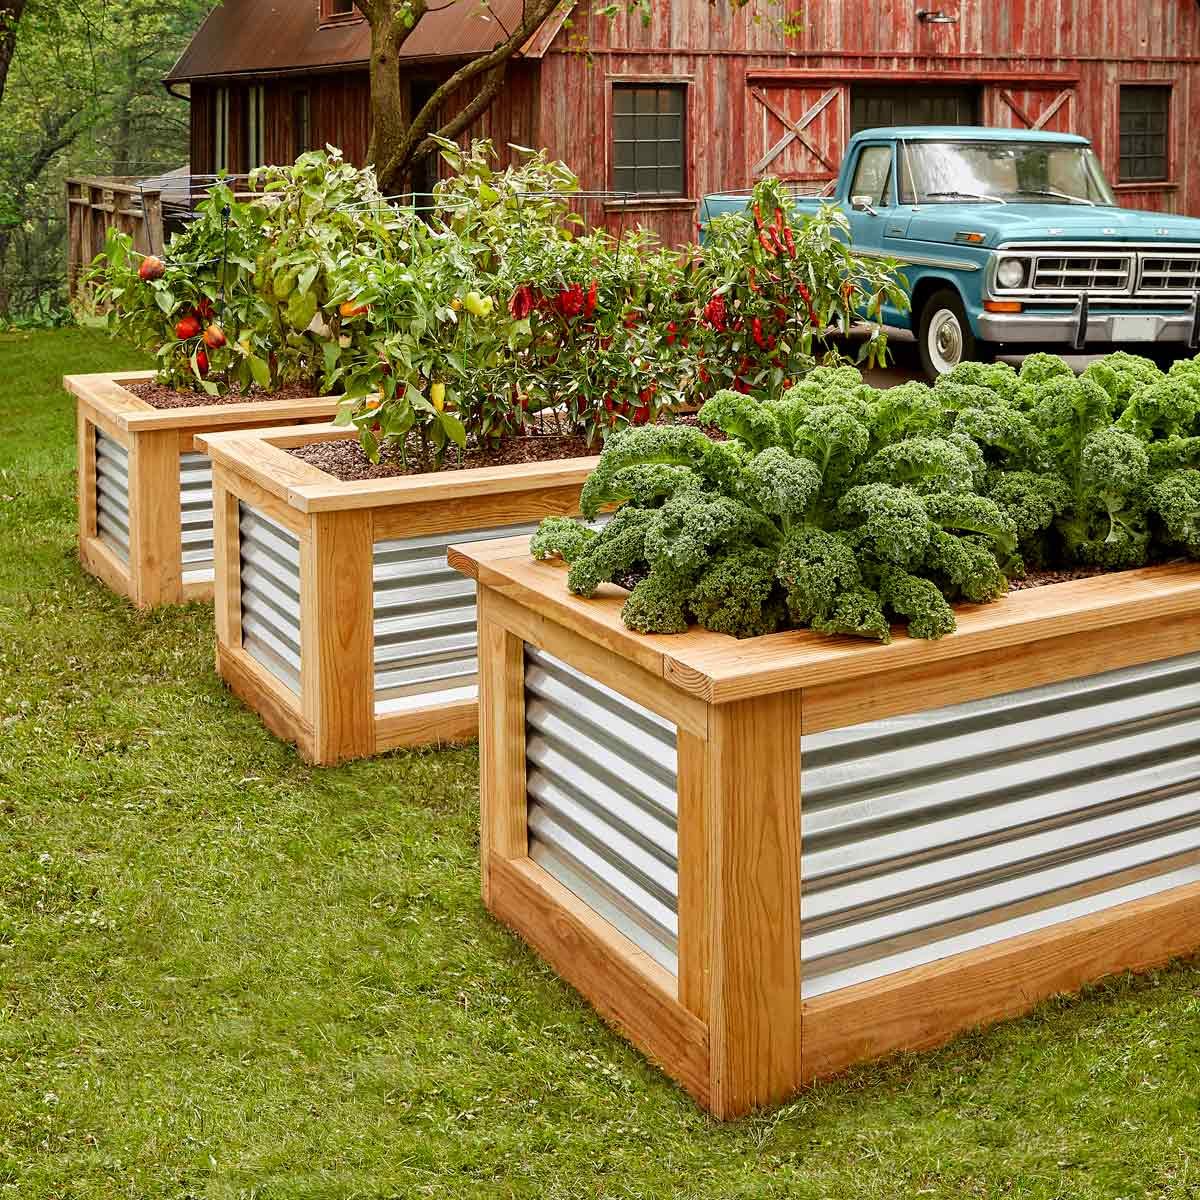 How To Build Raised Garden Beds Family Handyman